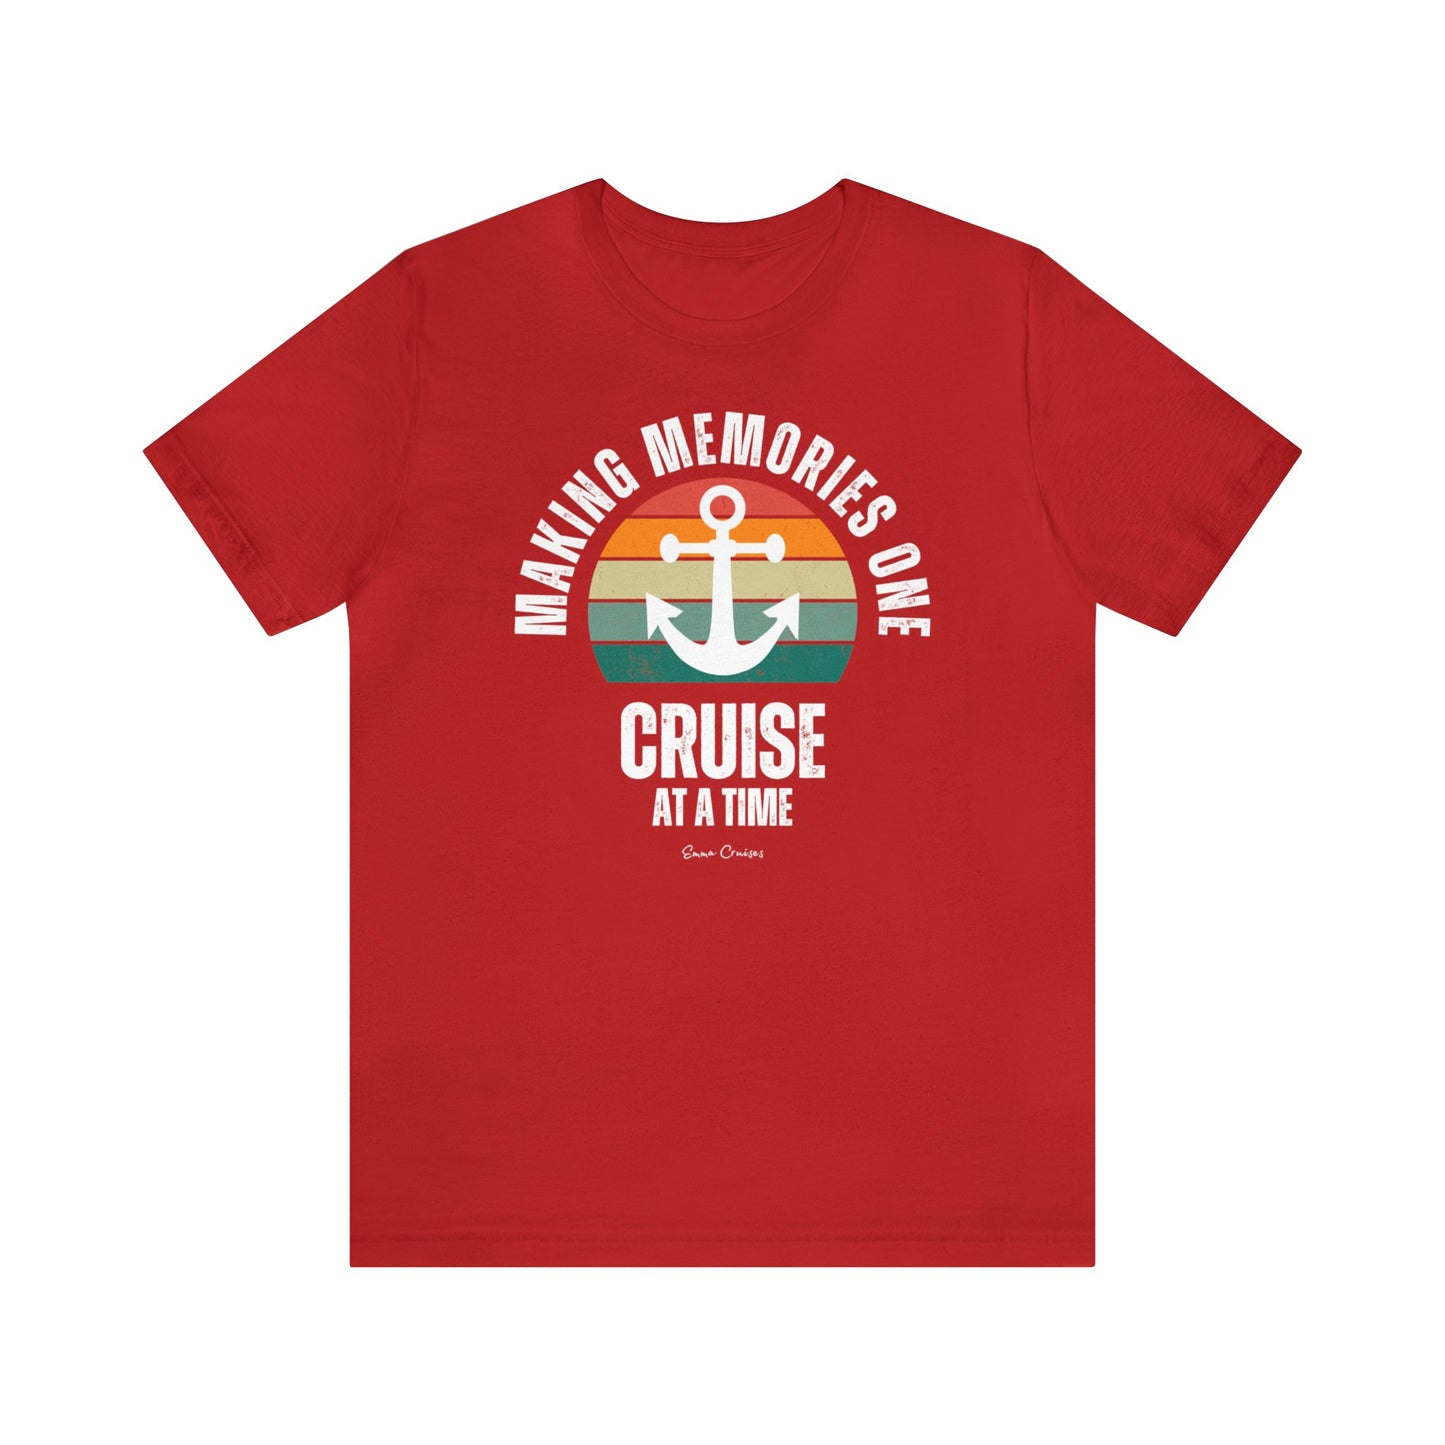 Making Memories One Cruise at a Time - UNISEX T-Shirt (UK)